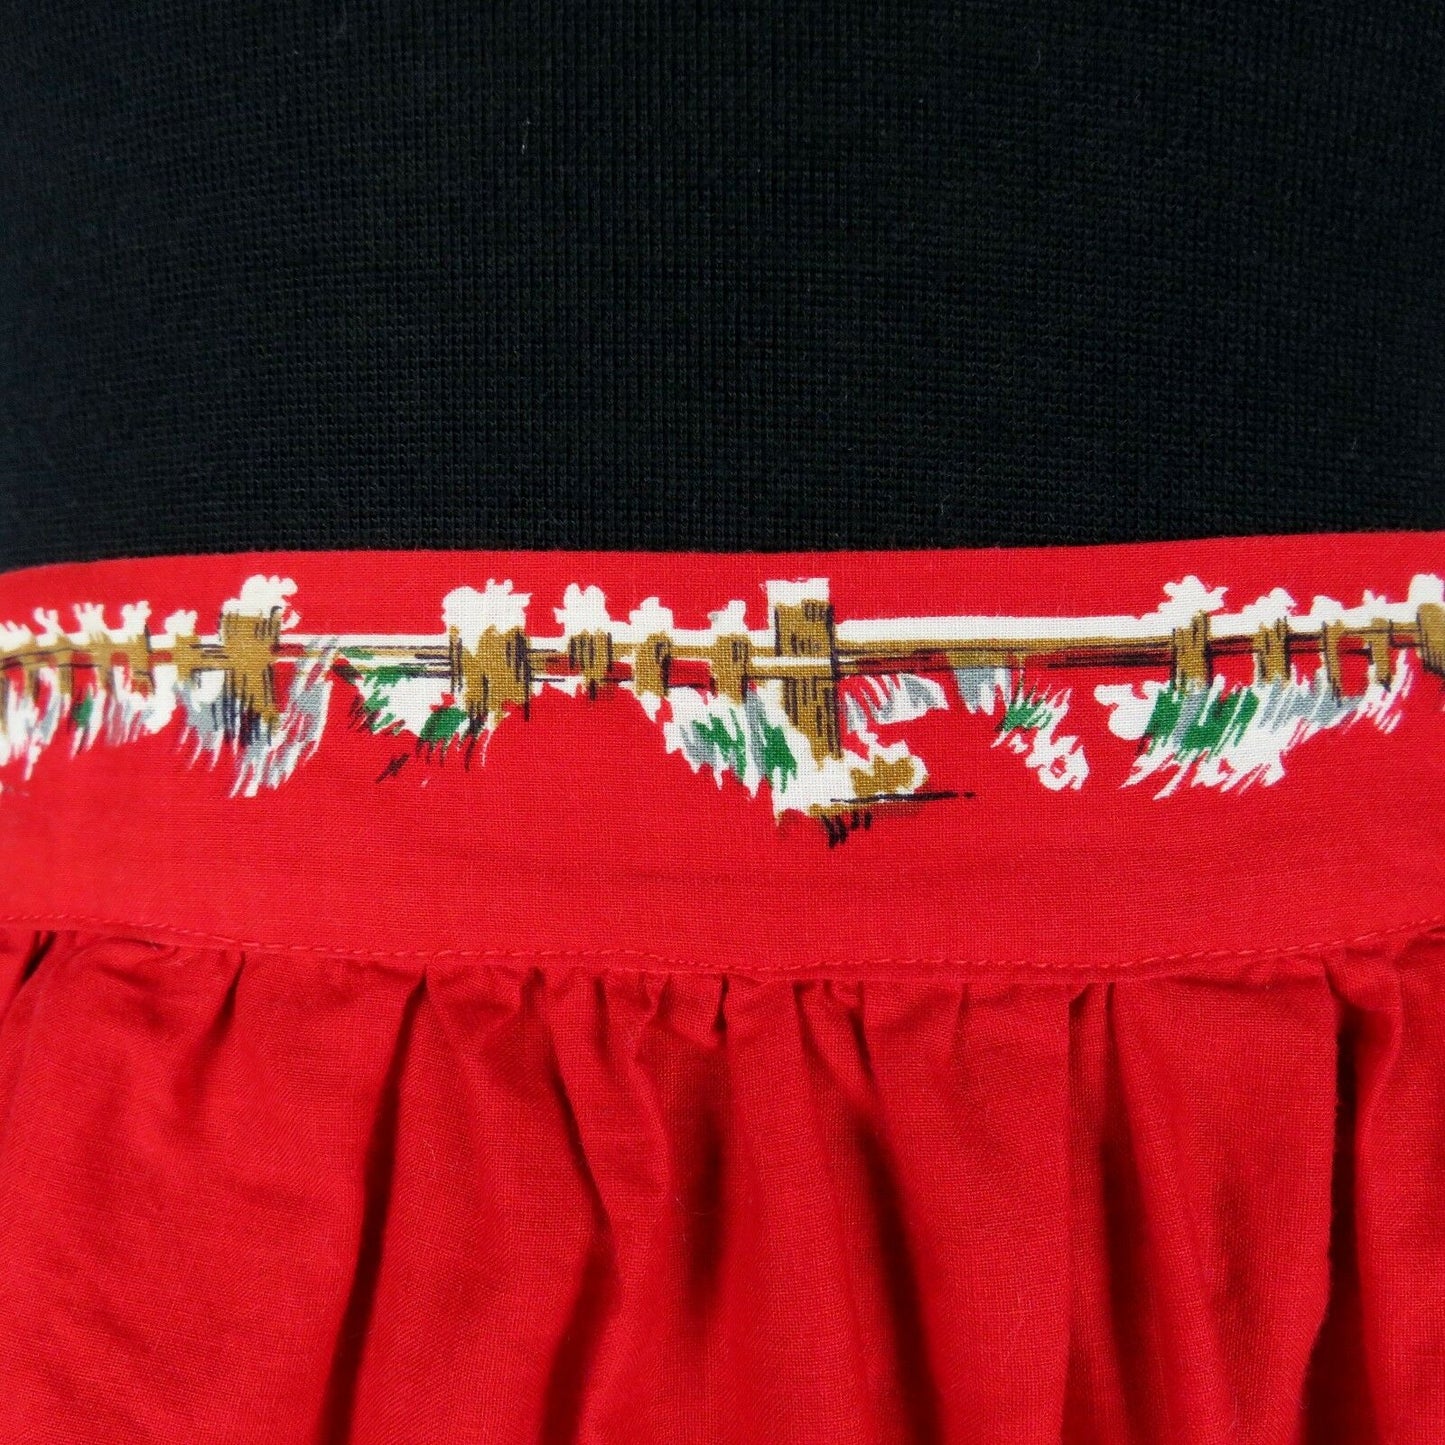 Vintage Christmas Apron Half Hostess Log Cabin Rustic Country Scene Frontier A15 - At Grandma's Table